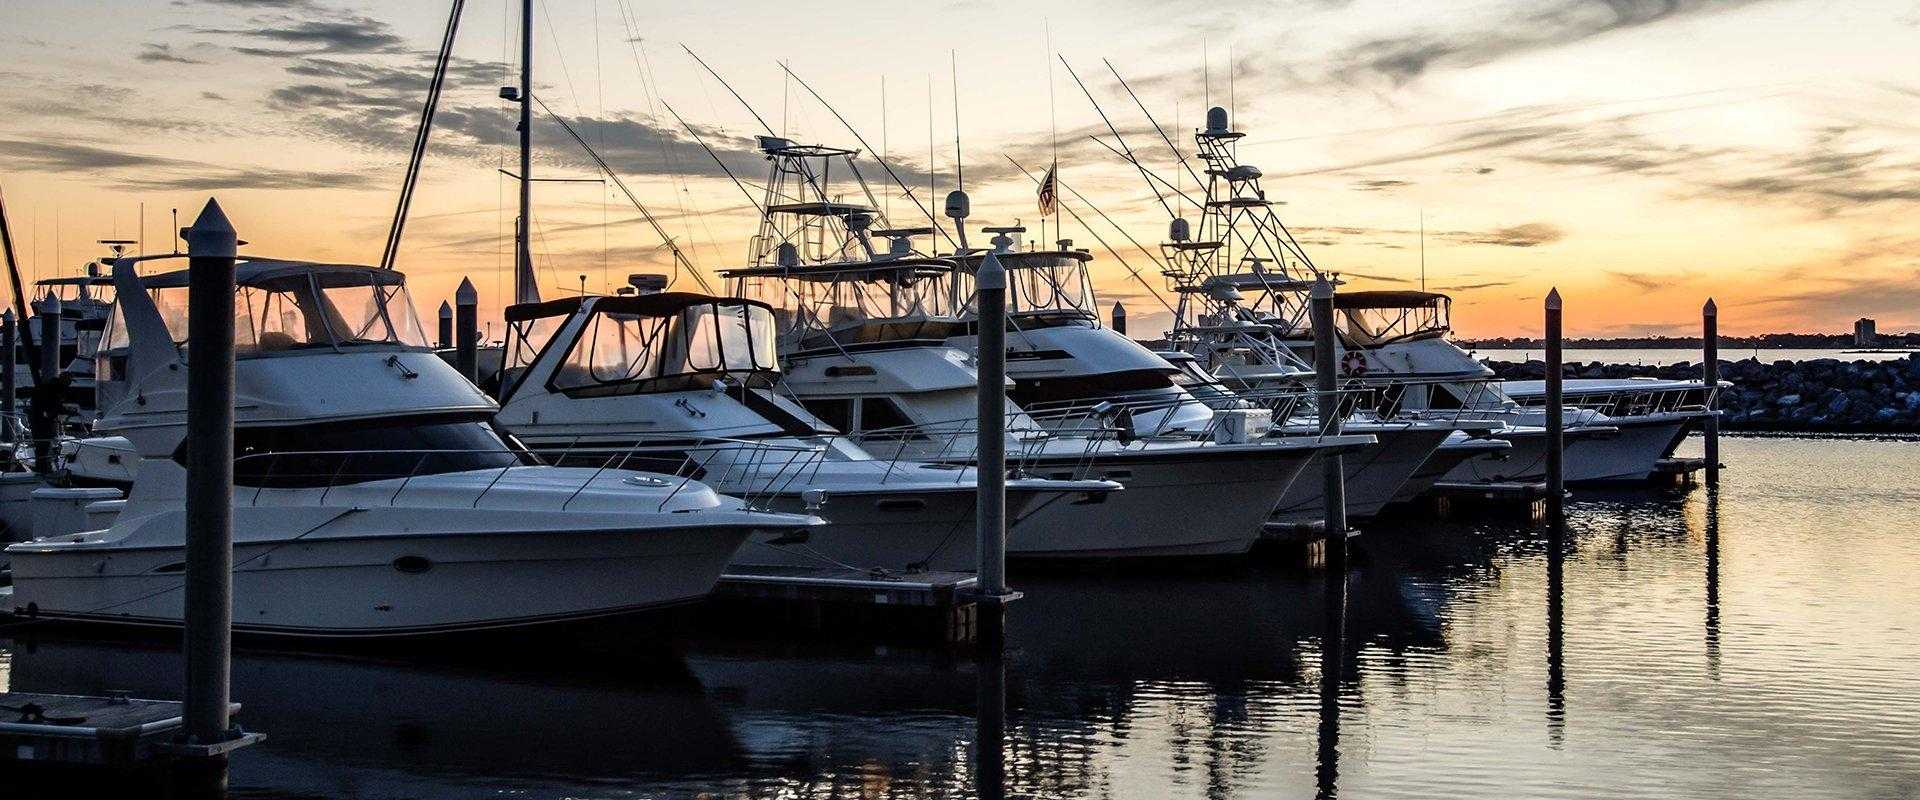 boats docked in south florida